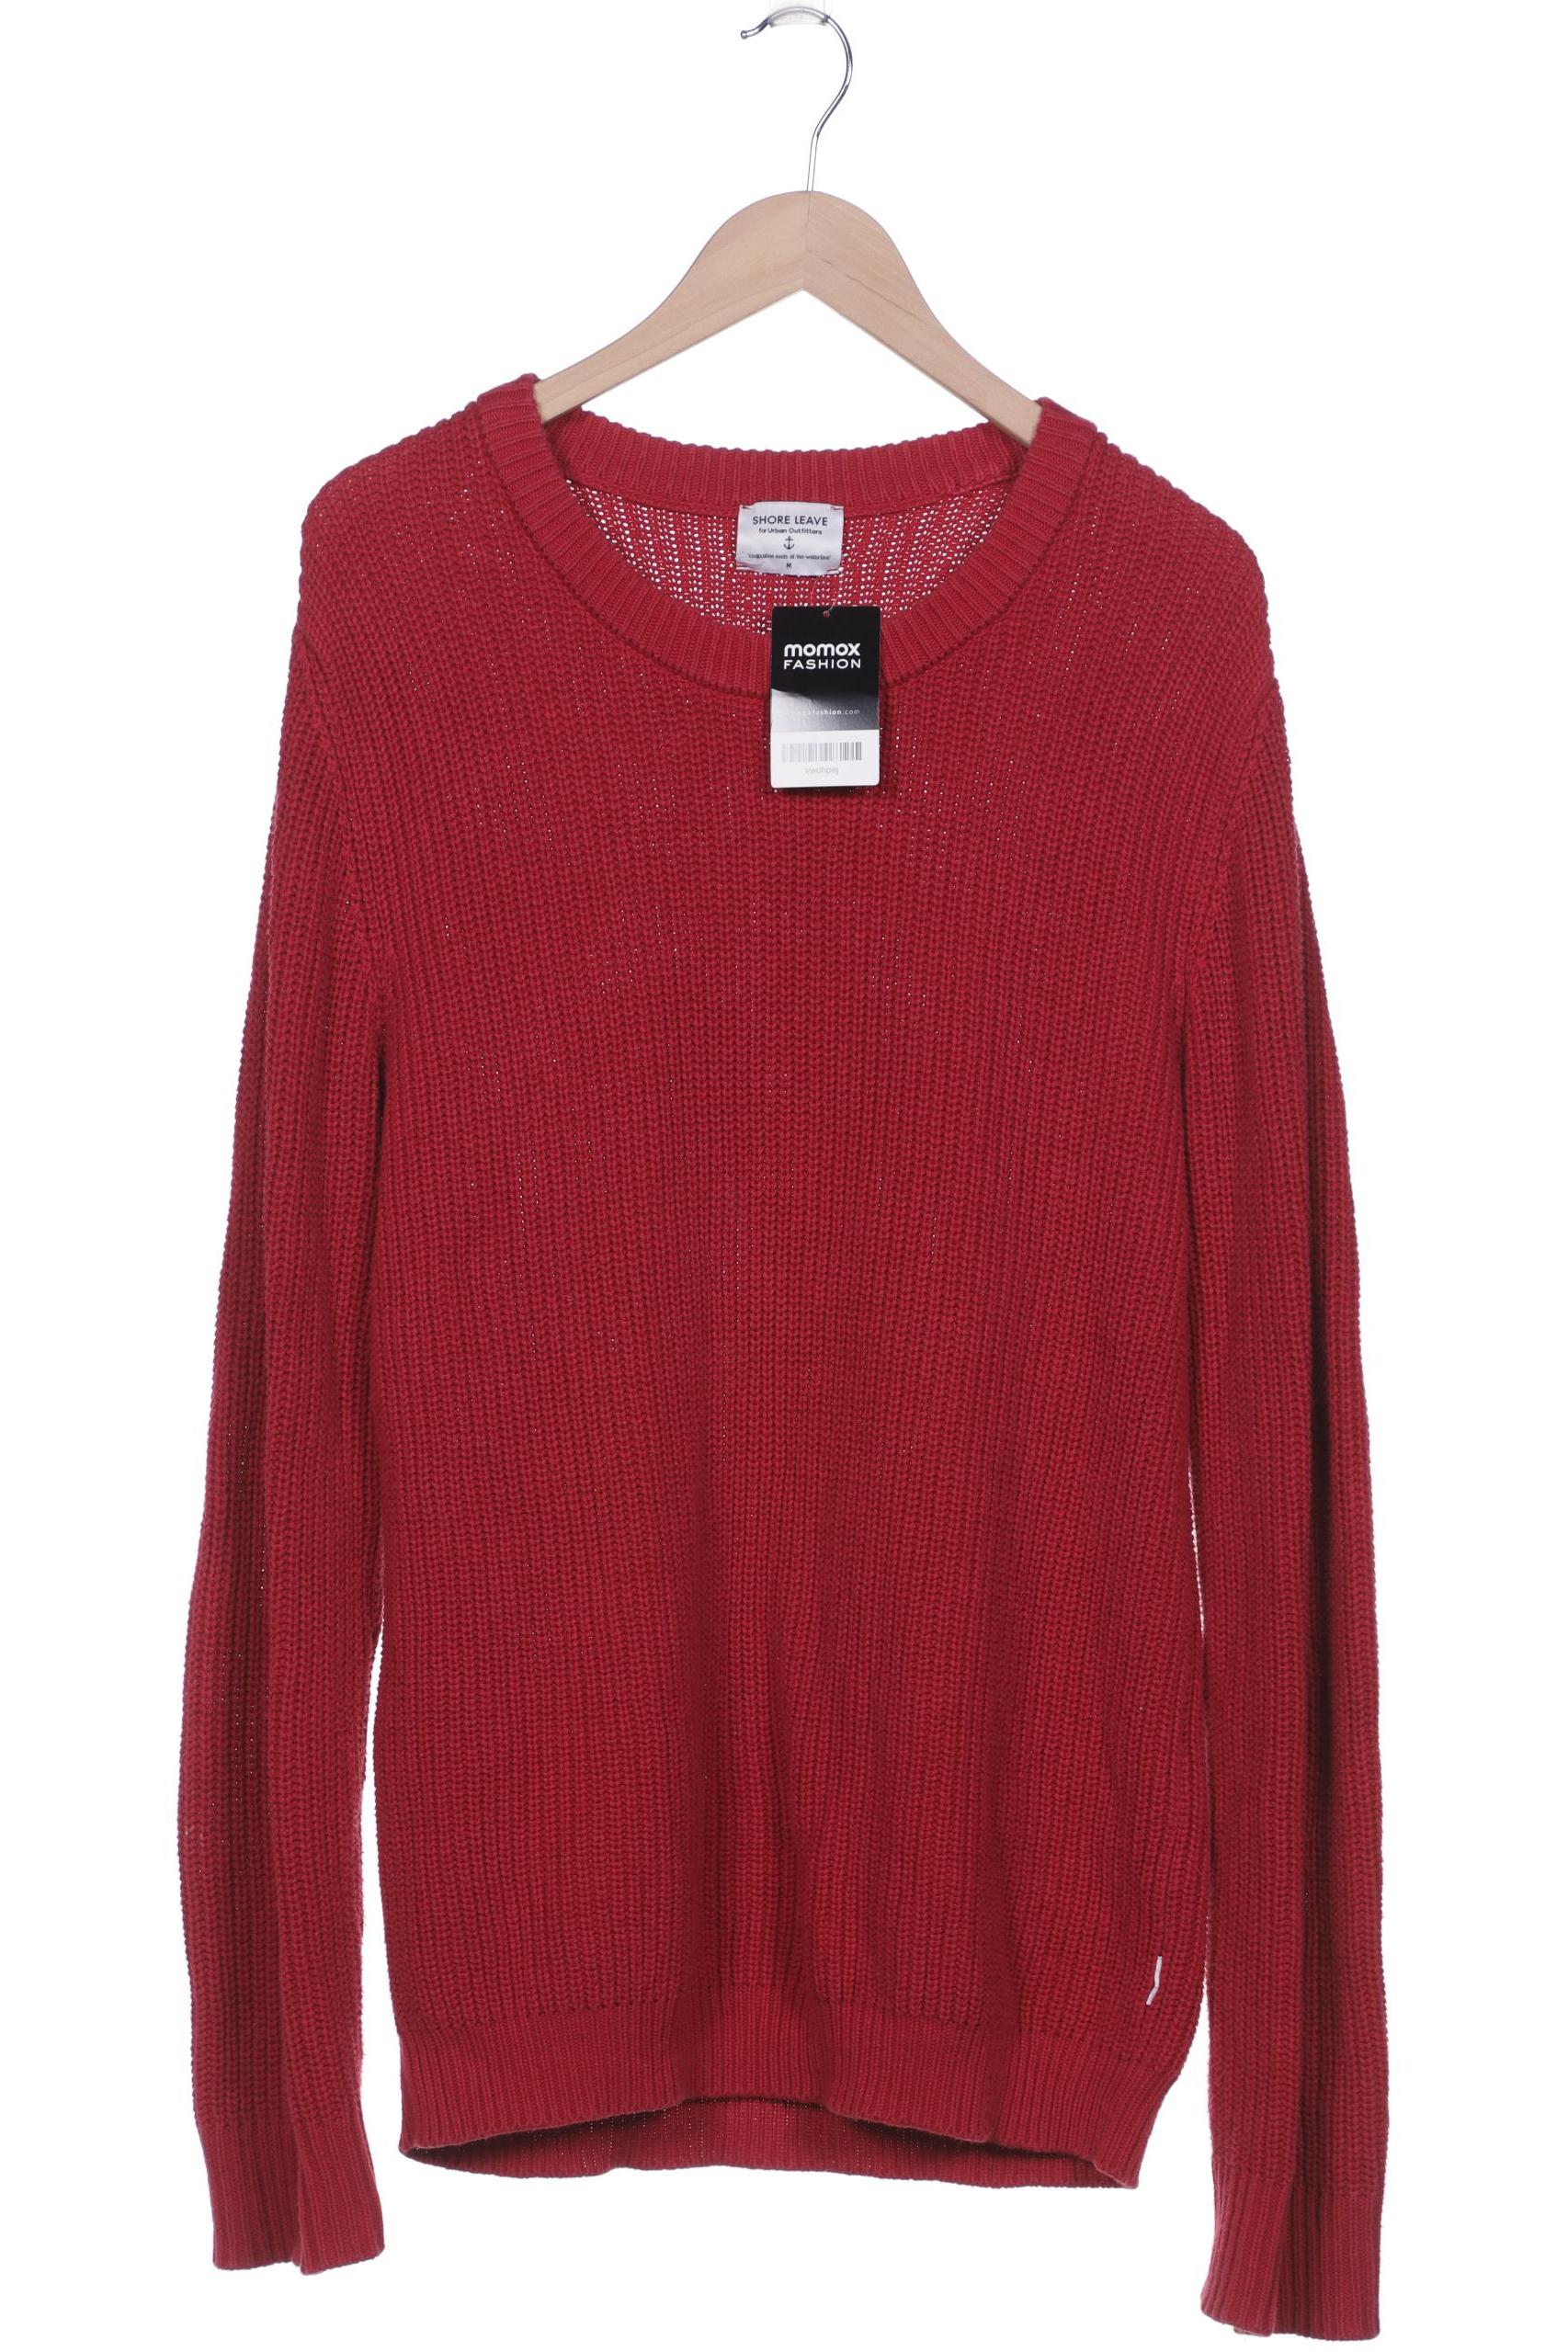 Urban Outfitters Herren Pullover, rot von Urban Outfitters